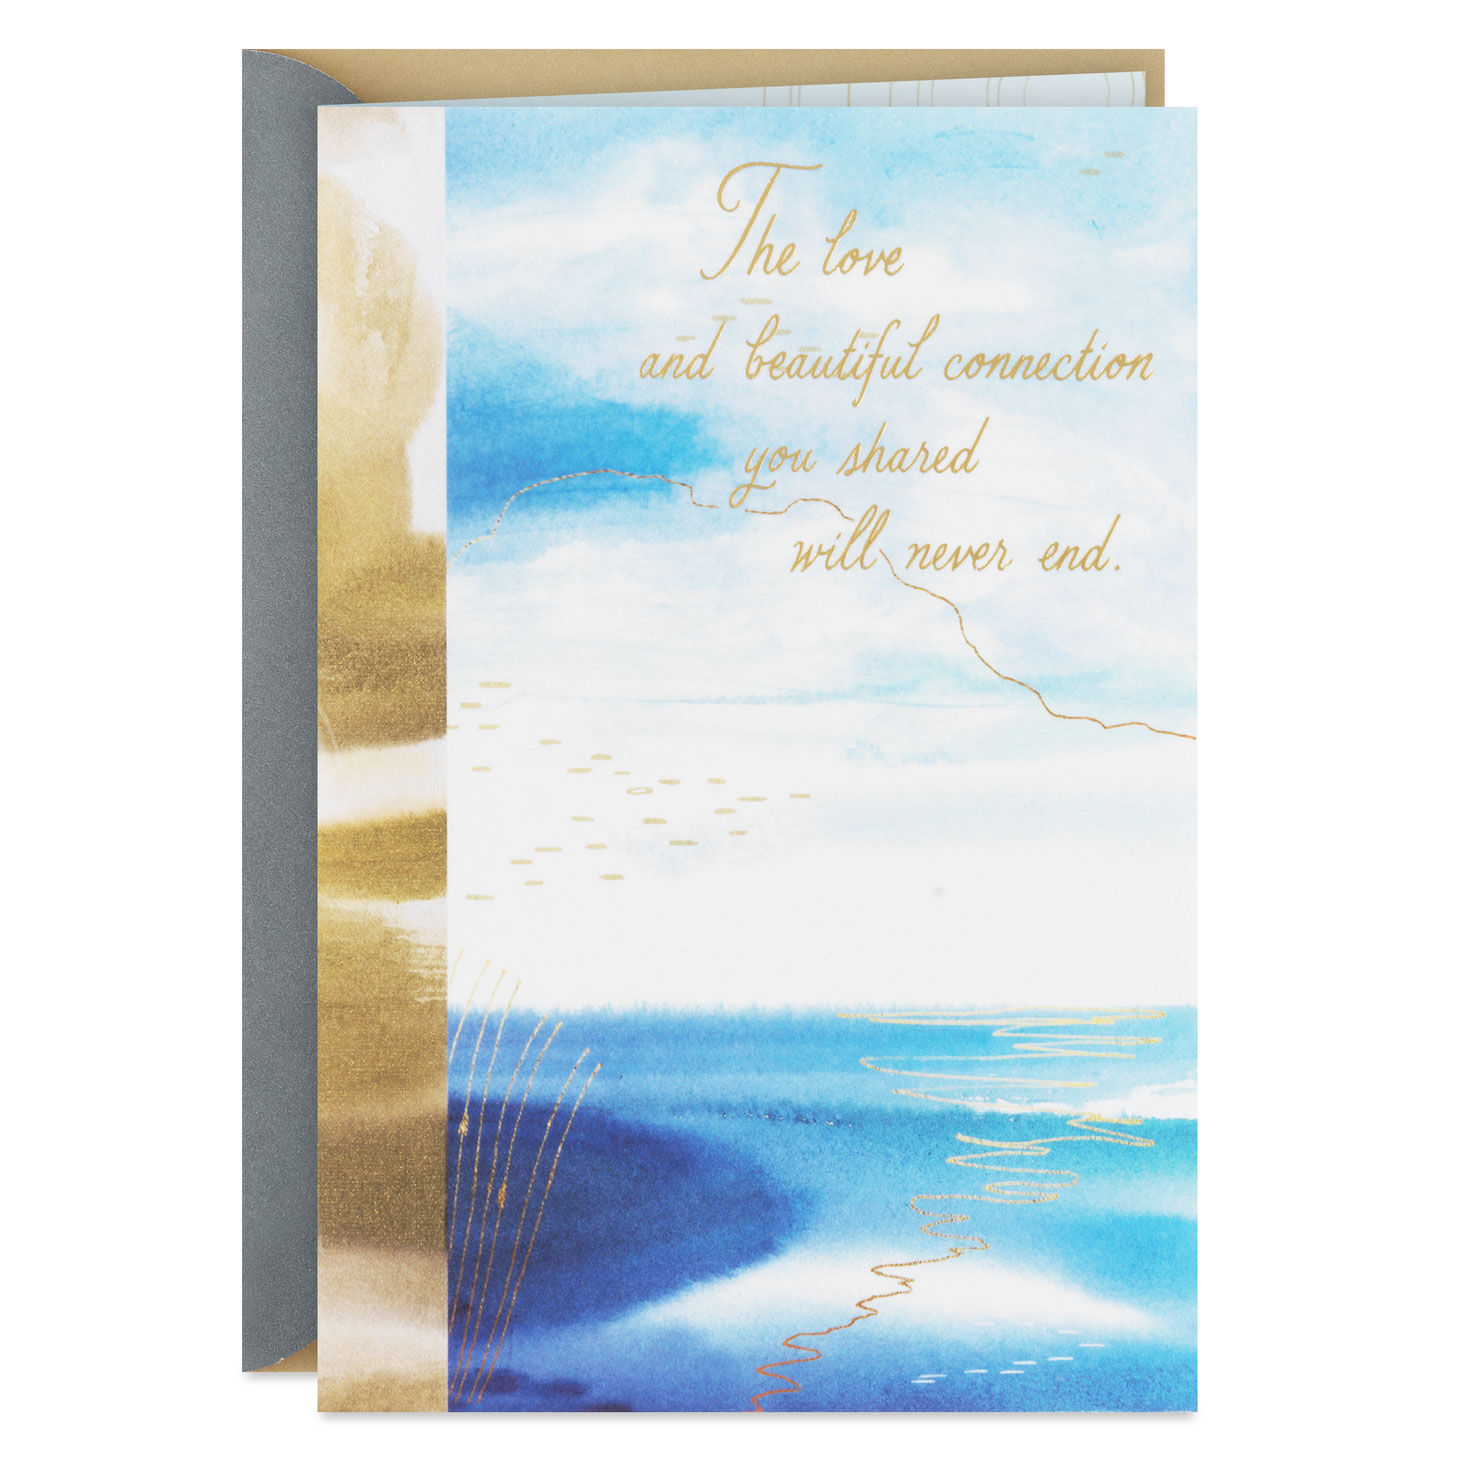 The Love and Connection You Shared Sympathy Card for Loss of Loved One for only USD 3.99 | Hallmark